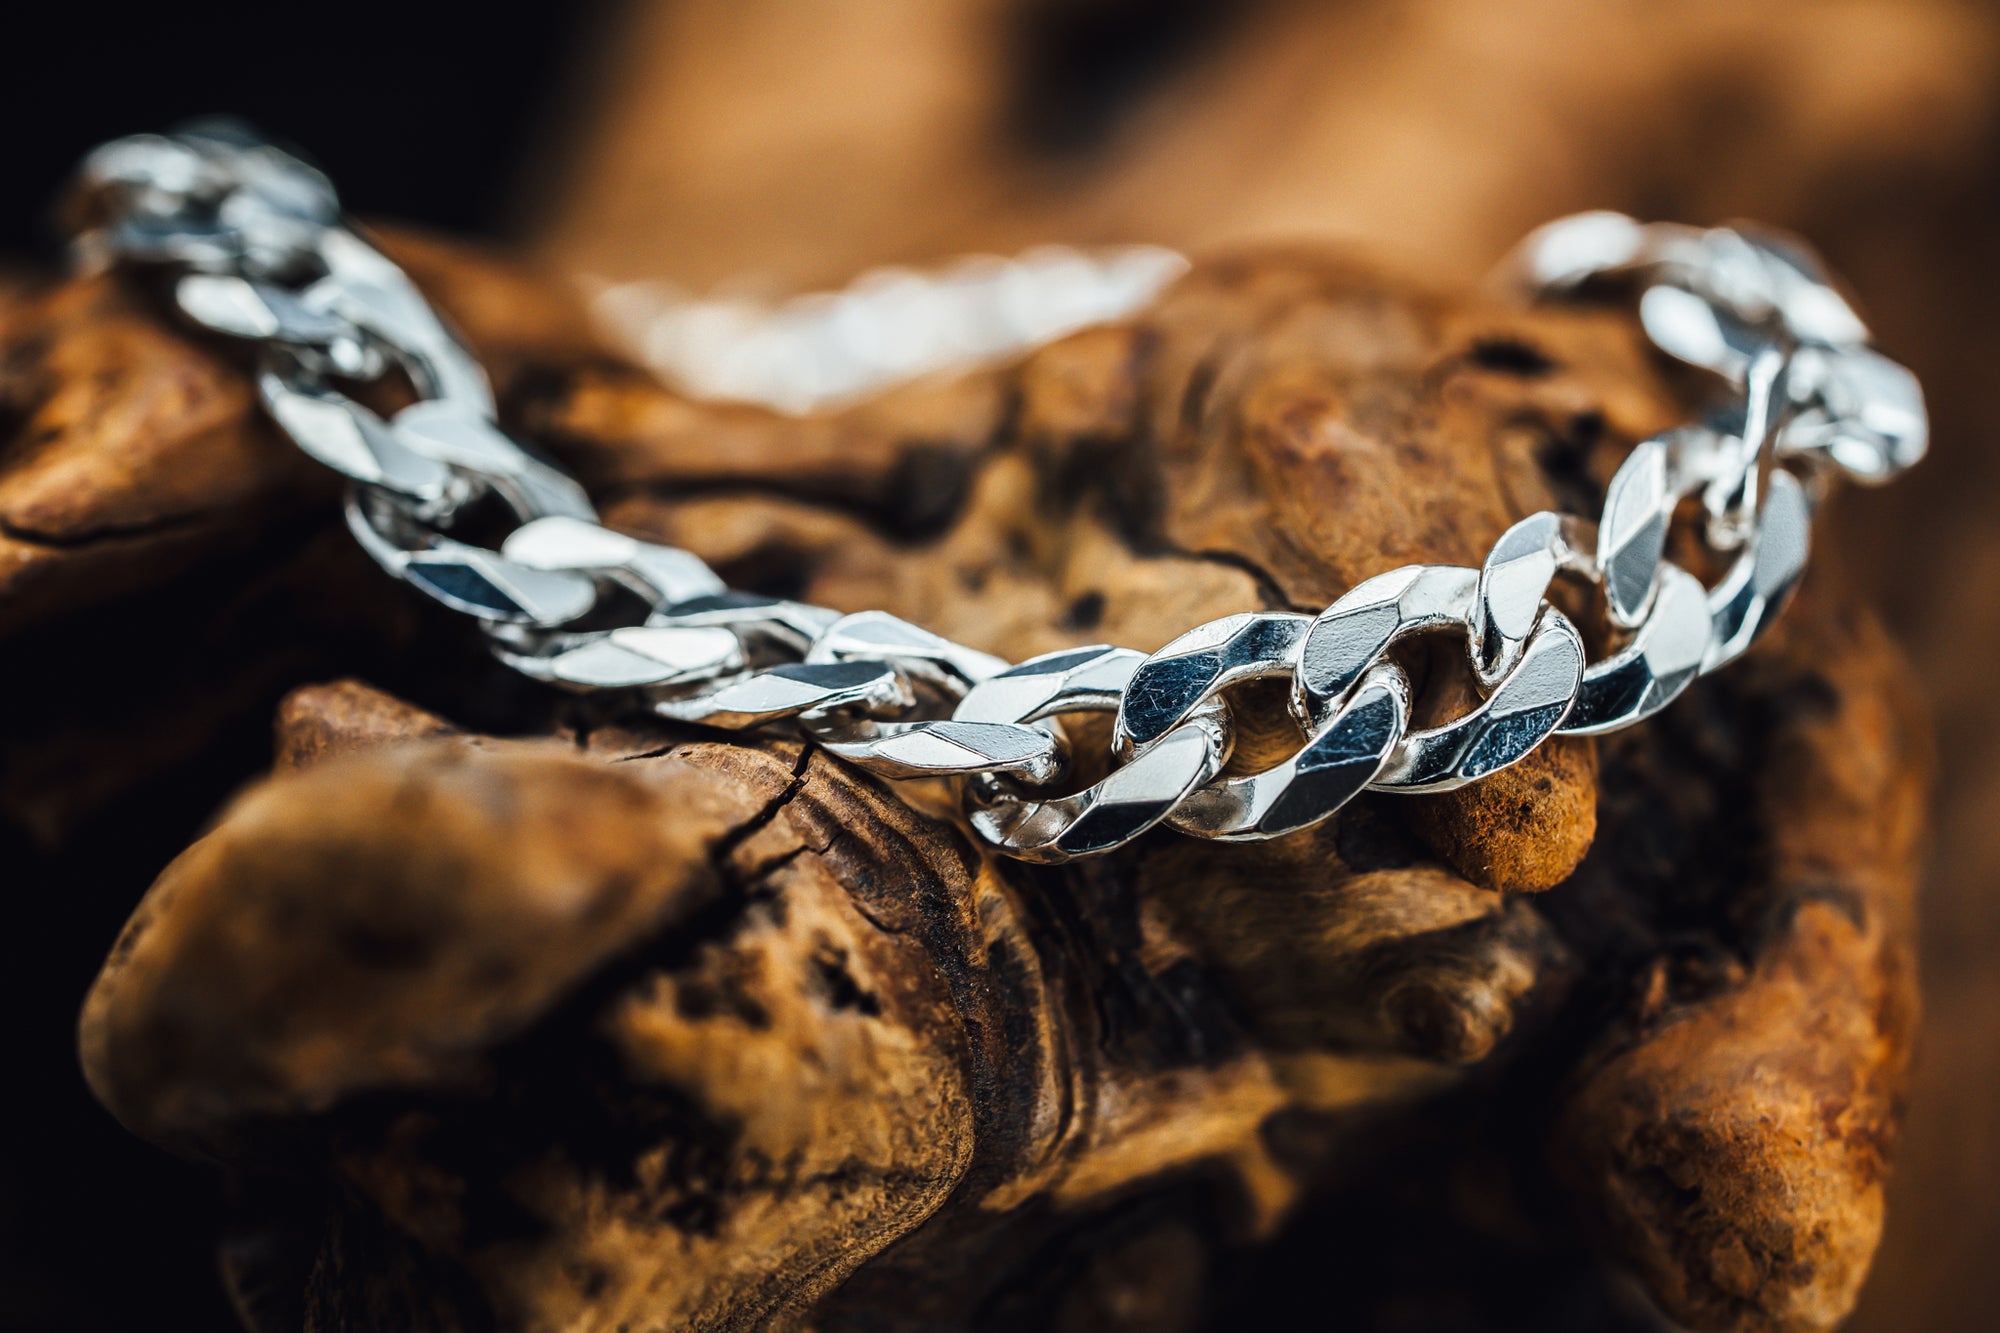 Sterling Silver Curb Chain Bracelet